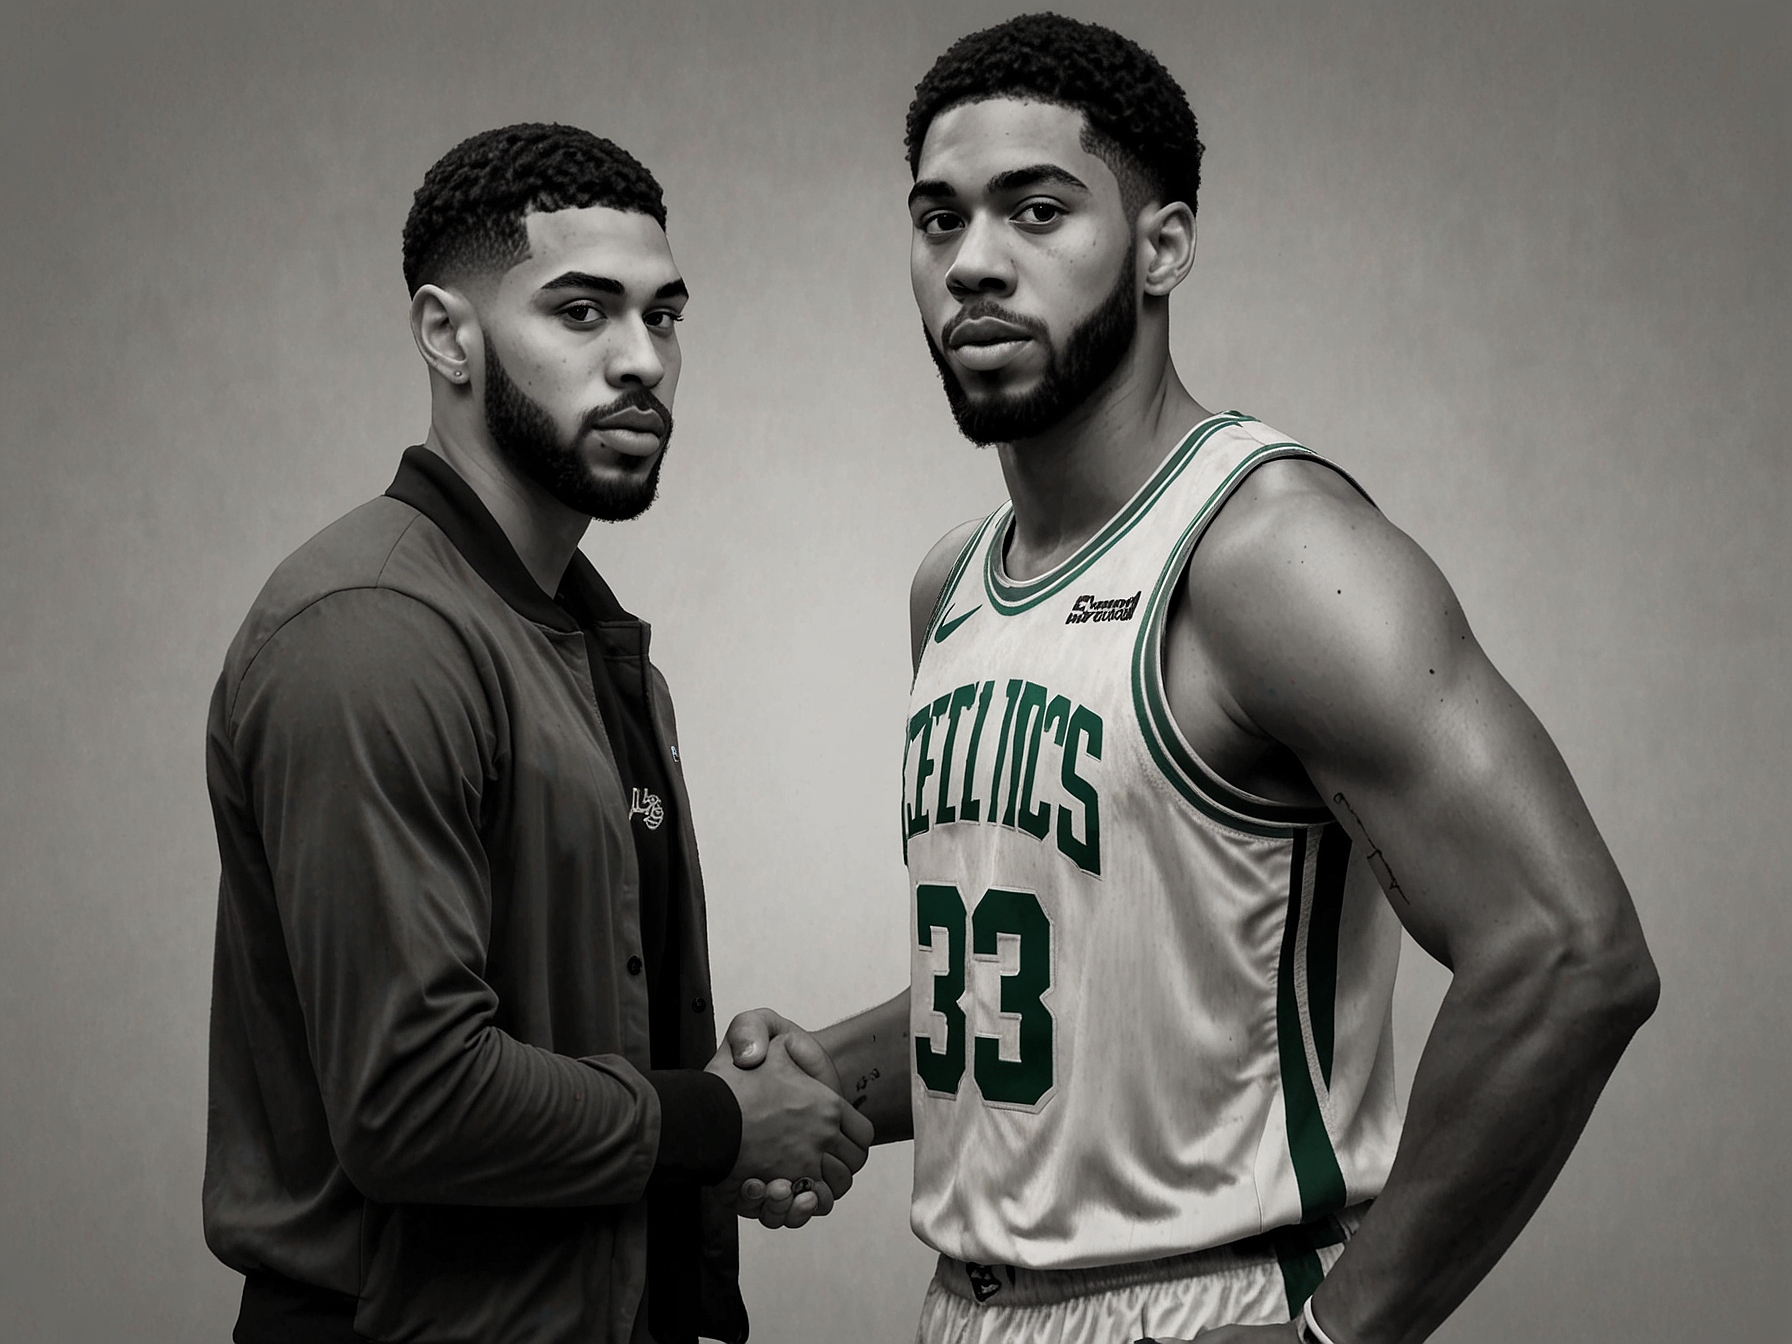 An illustration showing Anthony Davis in a Boston Celtics jersey shaking hands with Jayson Tatum in a Los Angeles Lakers jersey, capturing the major trade between the two star players.